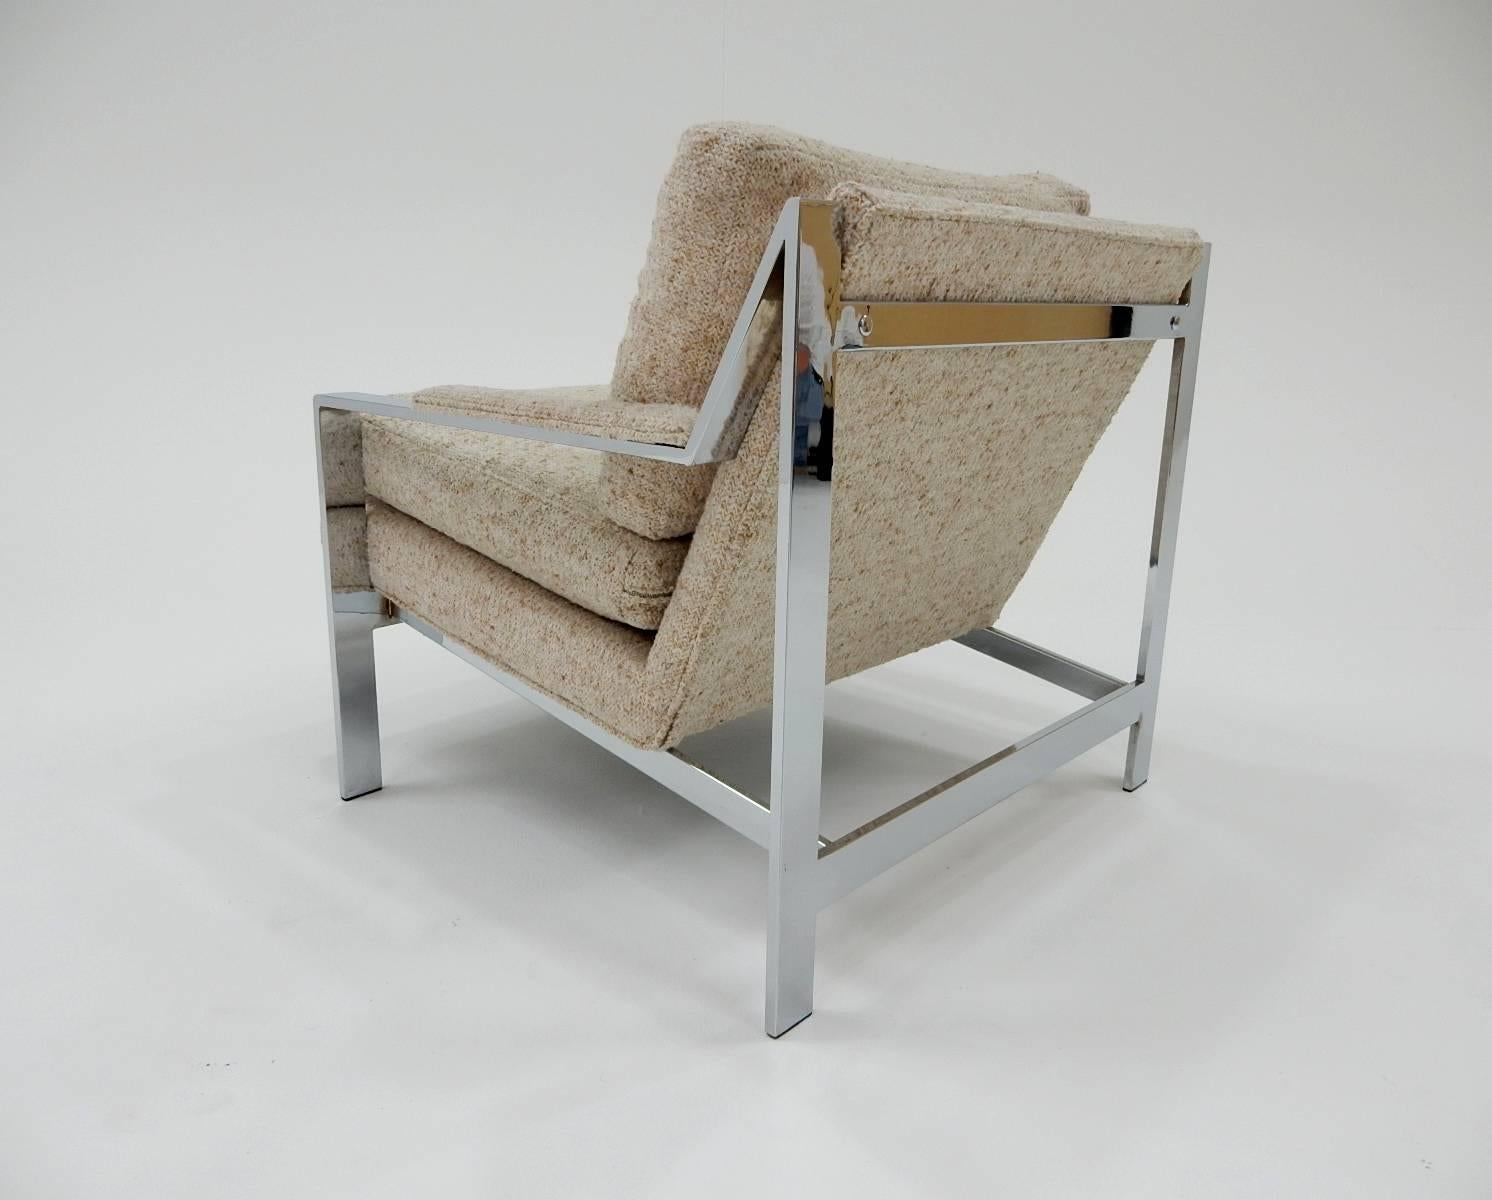 Pair of chrome flat bar lounge chairs #232 by Cy Mann, circa 1970s.
Plush and comfortable chairs with oatmeal color weave fabric.
Purchased from original owner. In very good condition.